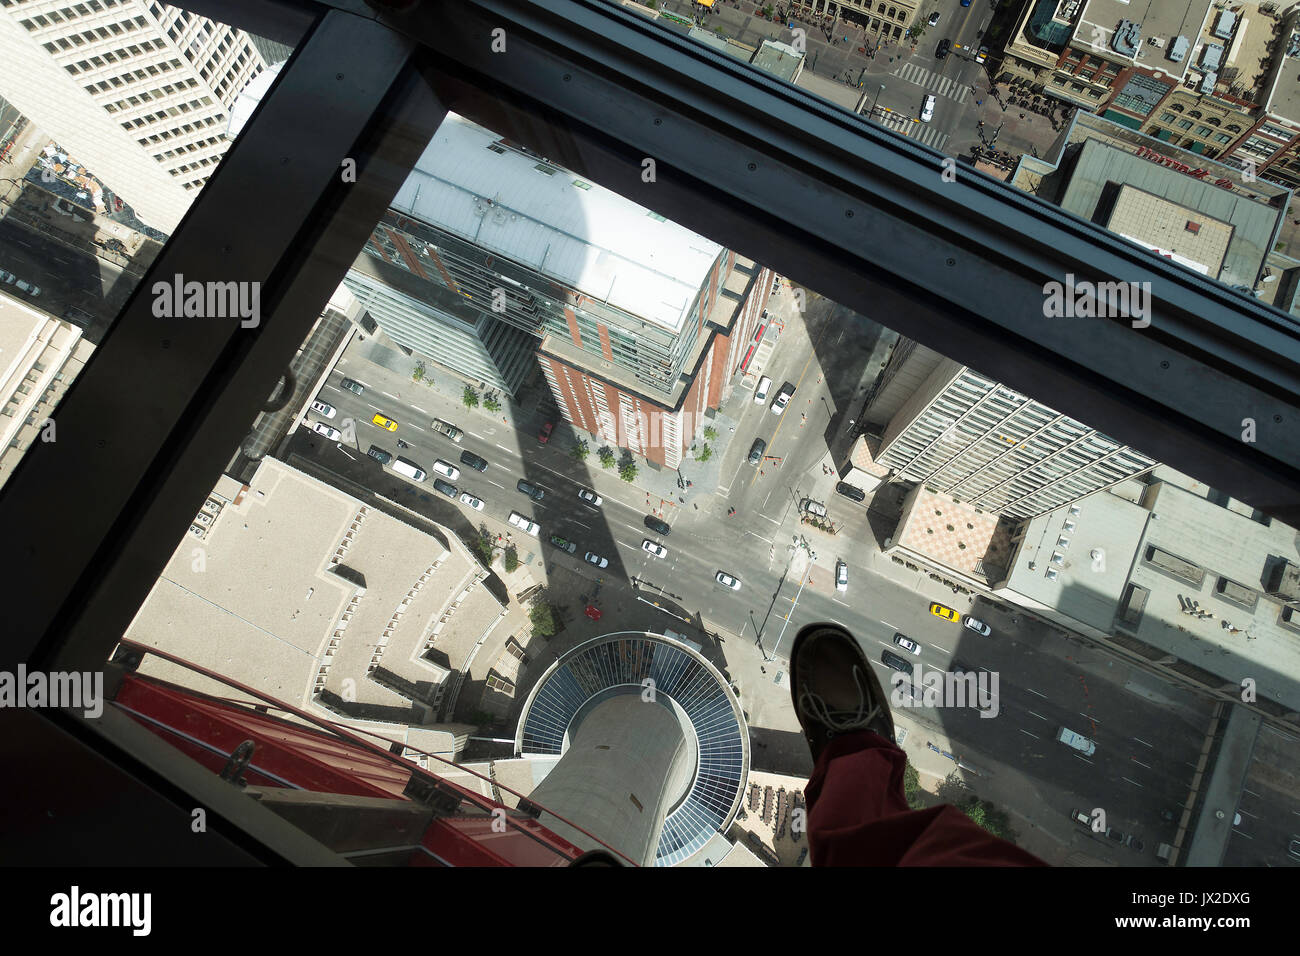 The View Straight Down Through The Glass Floor From The Viewing Platform of The Calgary Tower to The Street Below in Calgary Alberta Canada Stock Photo